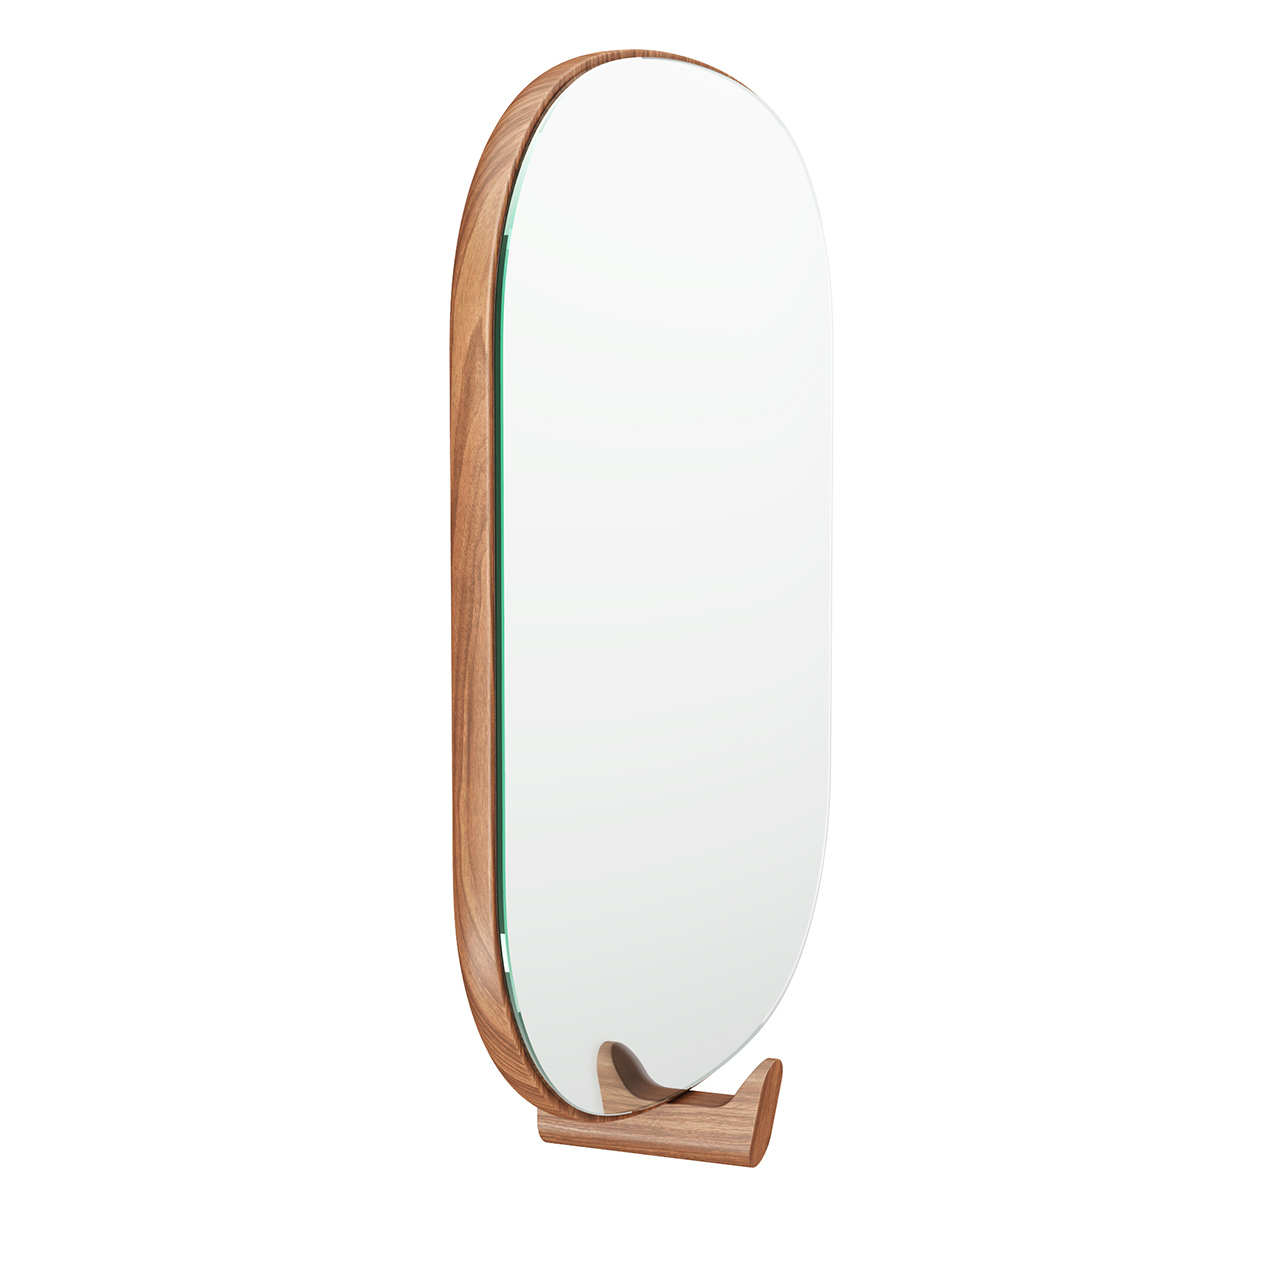 Ad Ore Wall-mounted Mirror by Zeitraum